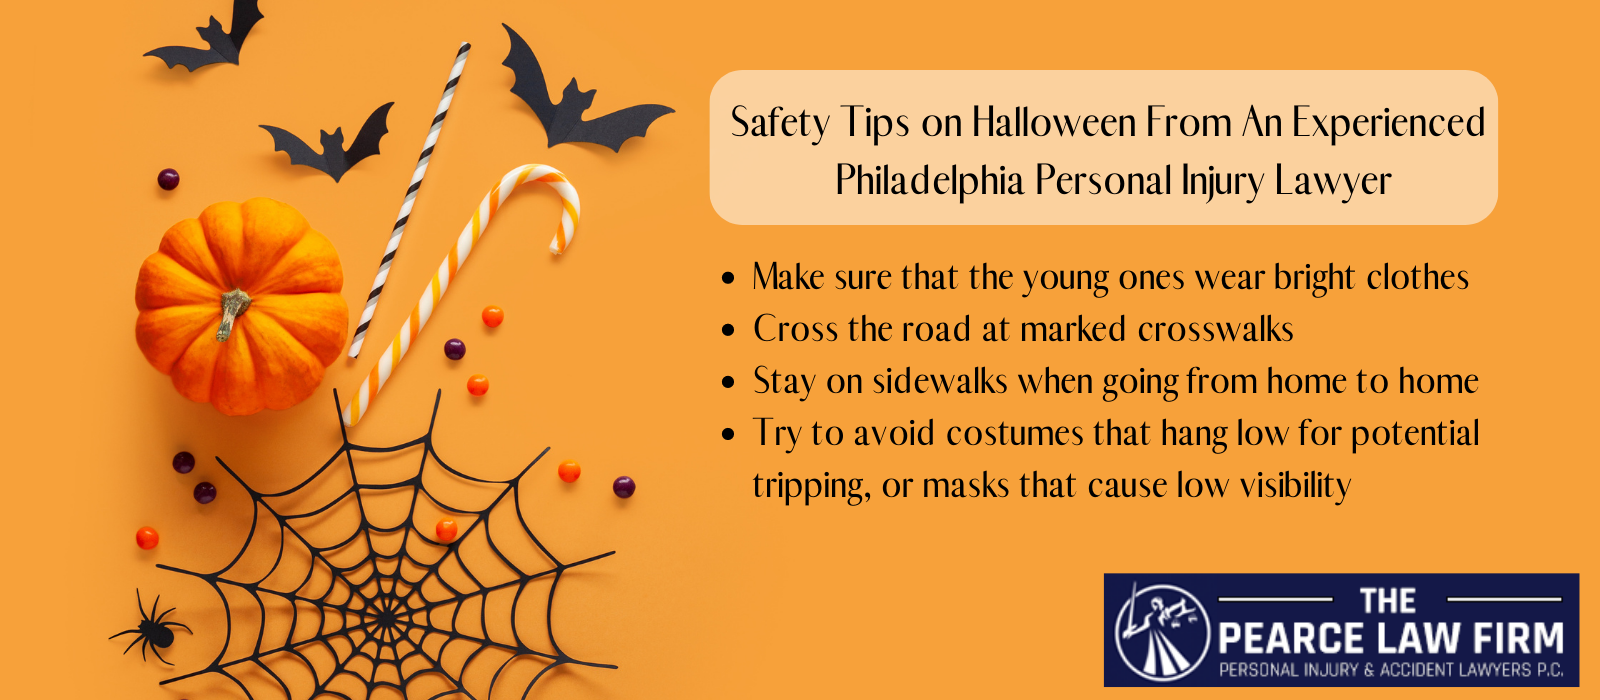 The Pearce Law Firm Safety Tips on Halloween From An Experienced Philadelphia